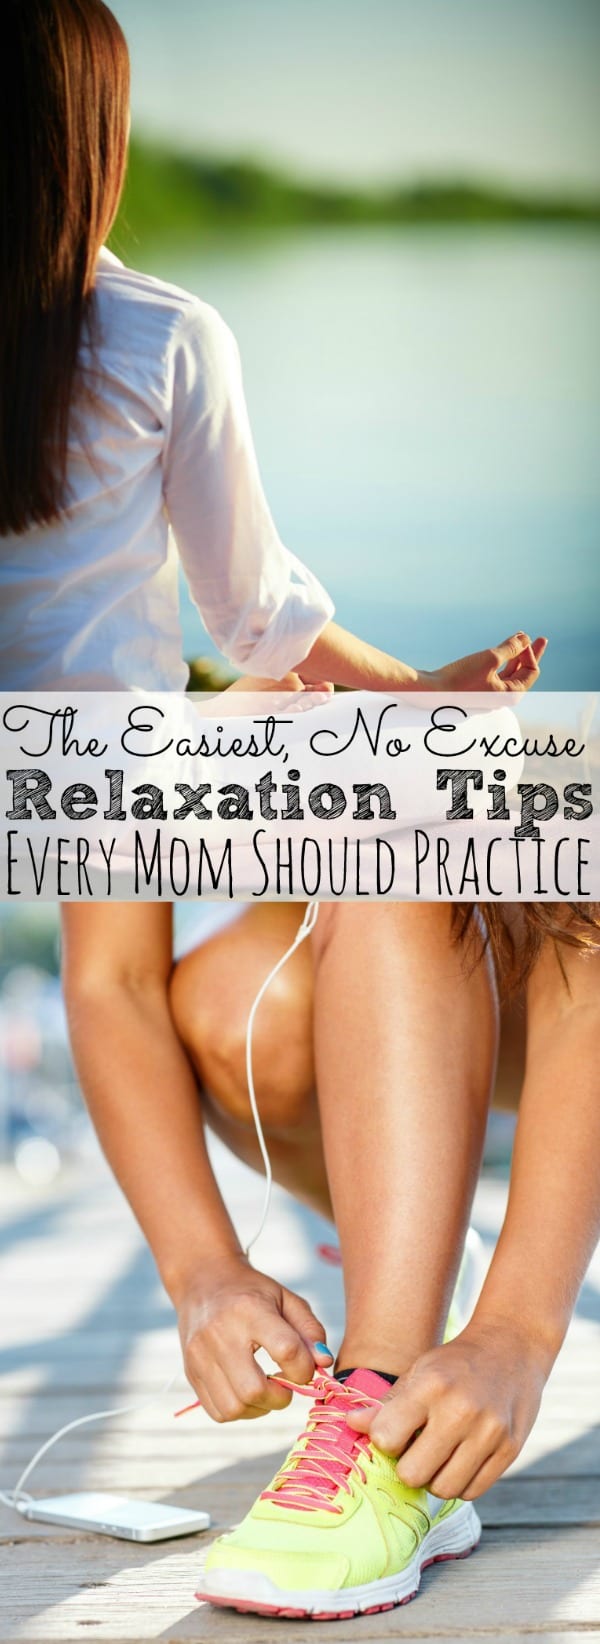 The Easiest Relaxation Tips For Moms